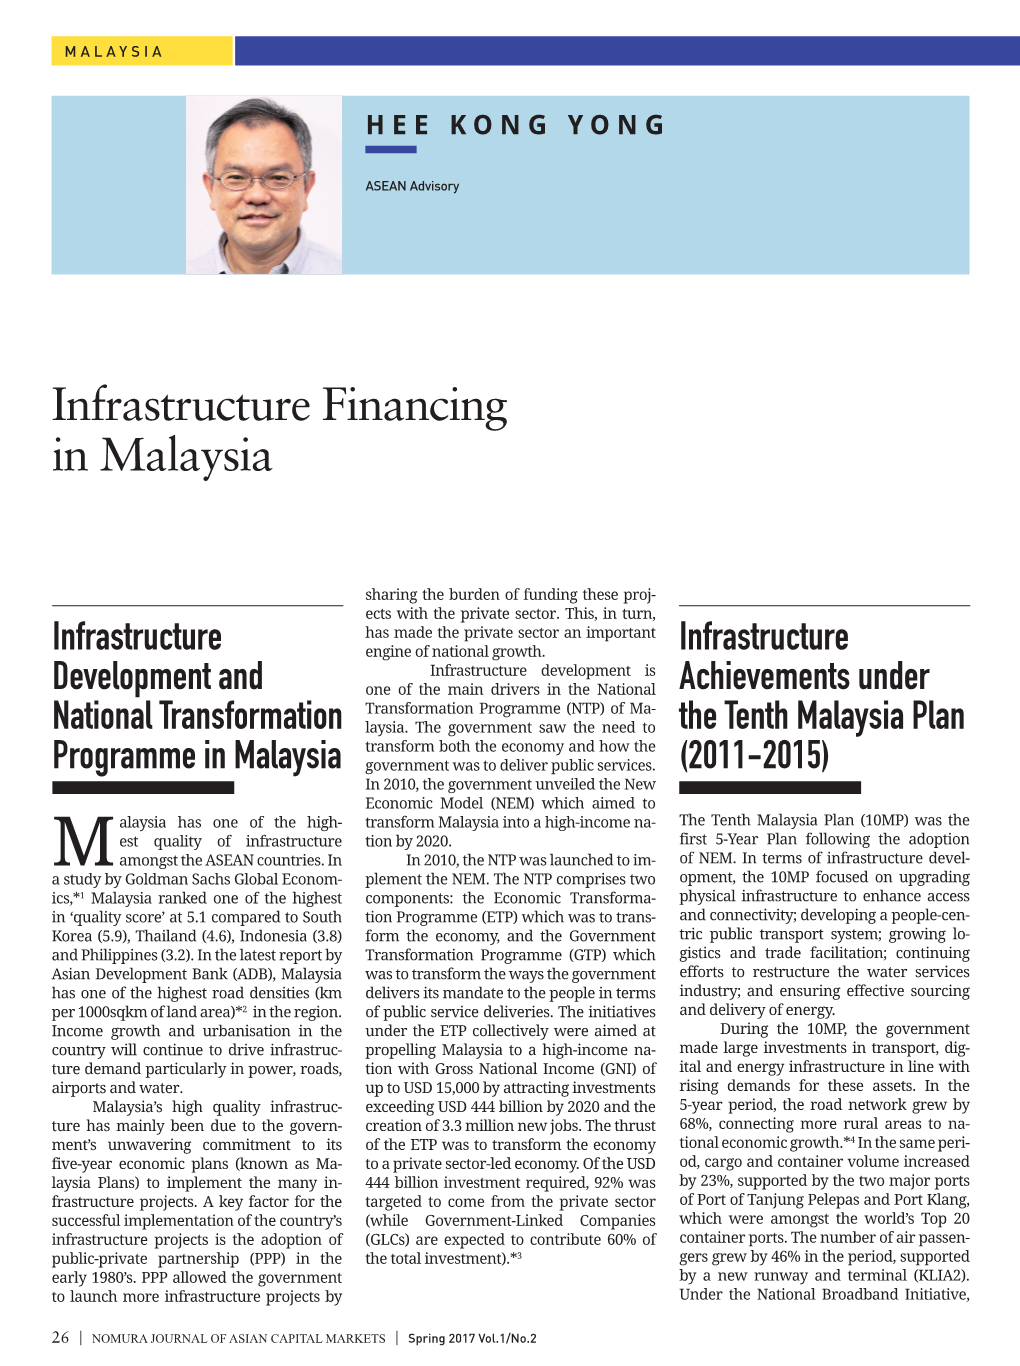 Infrastructure Financing in Malaysia